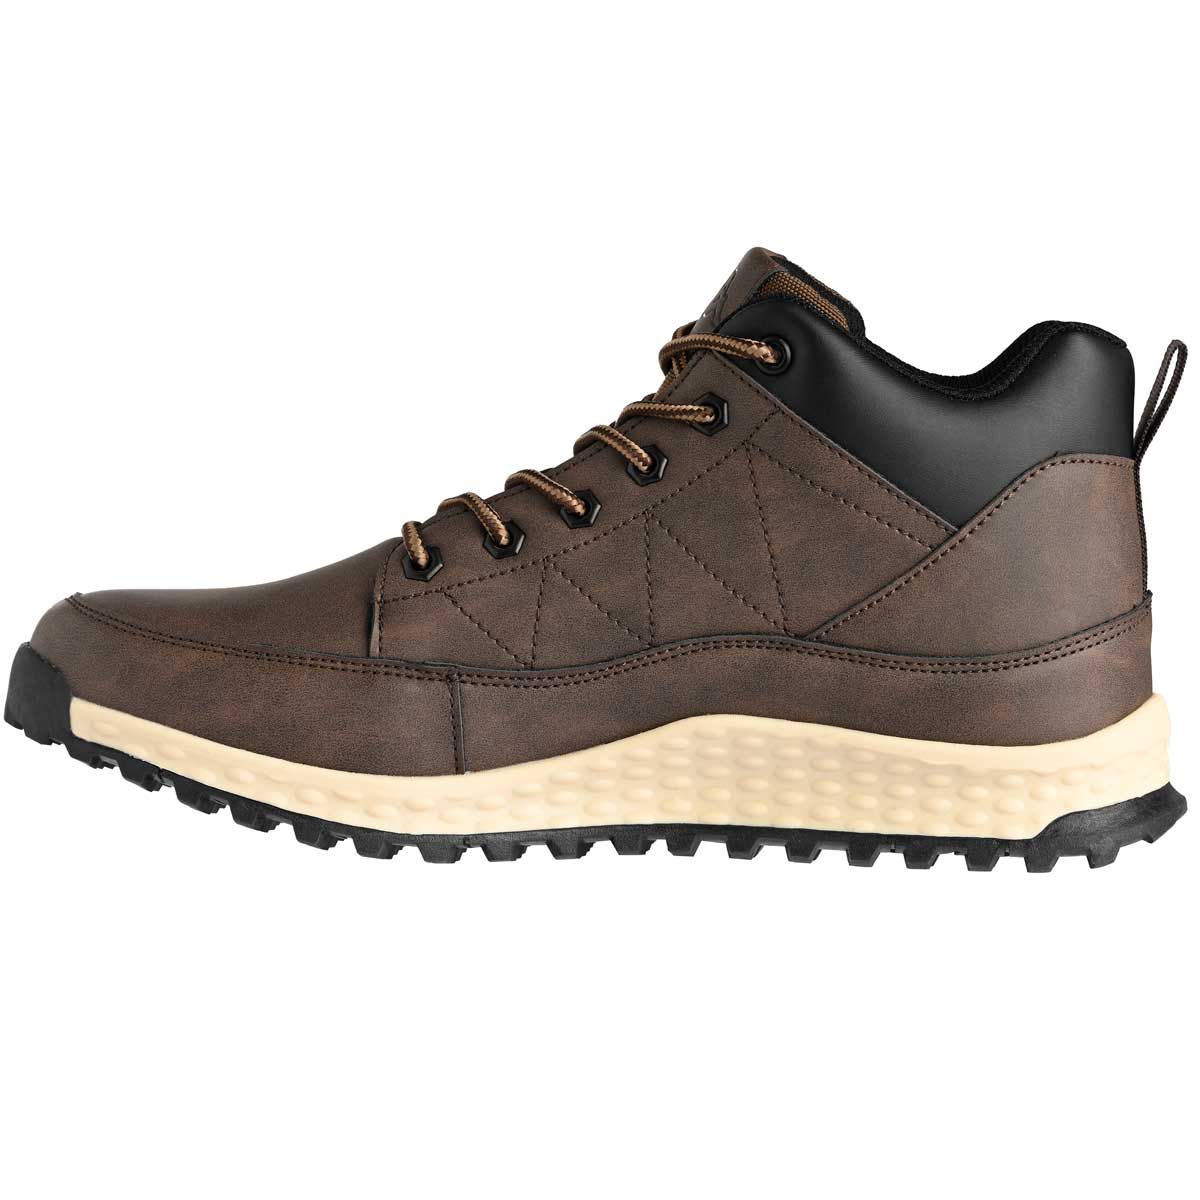 Chaussures lifestyle Andem marron homme